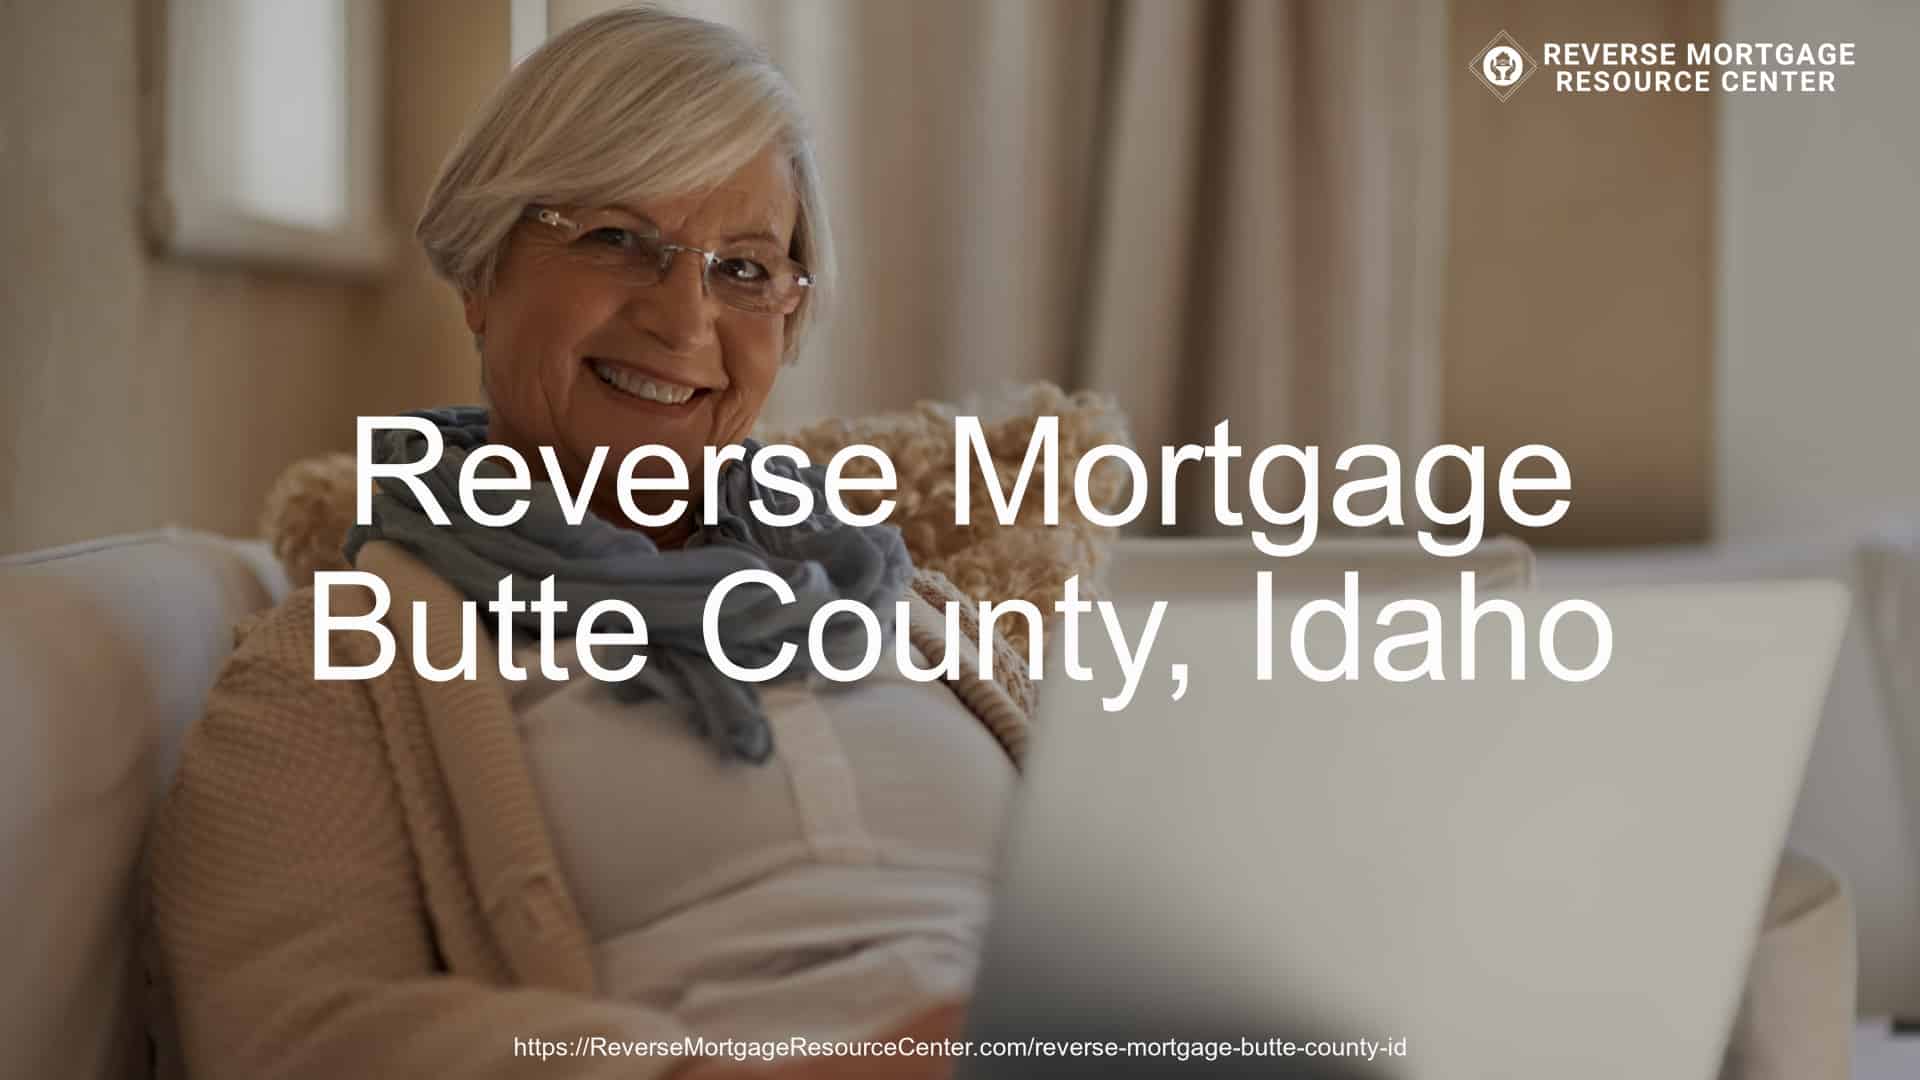 Reverse Mortgage Loans in Butte County Idaho